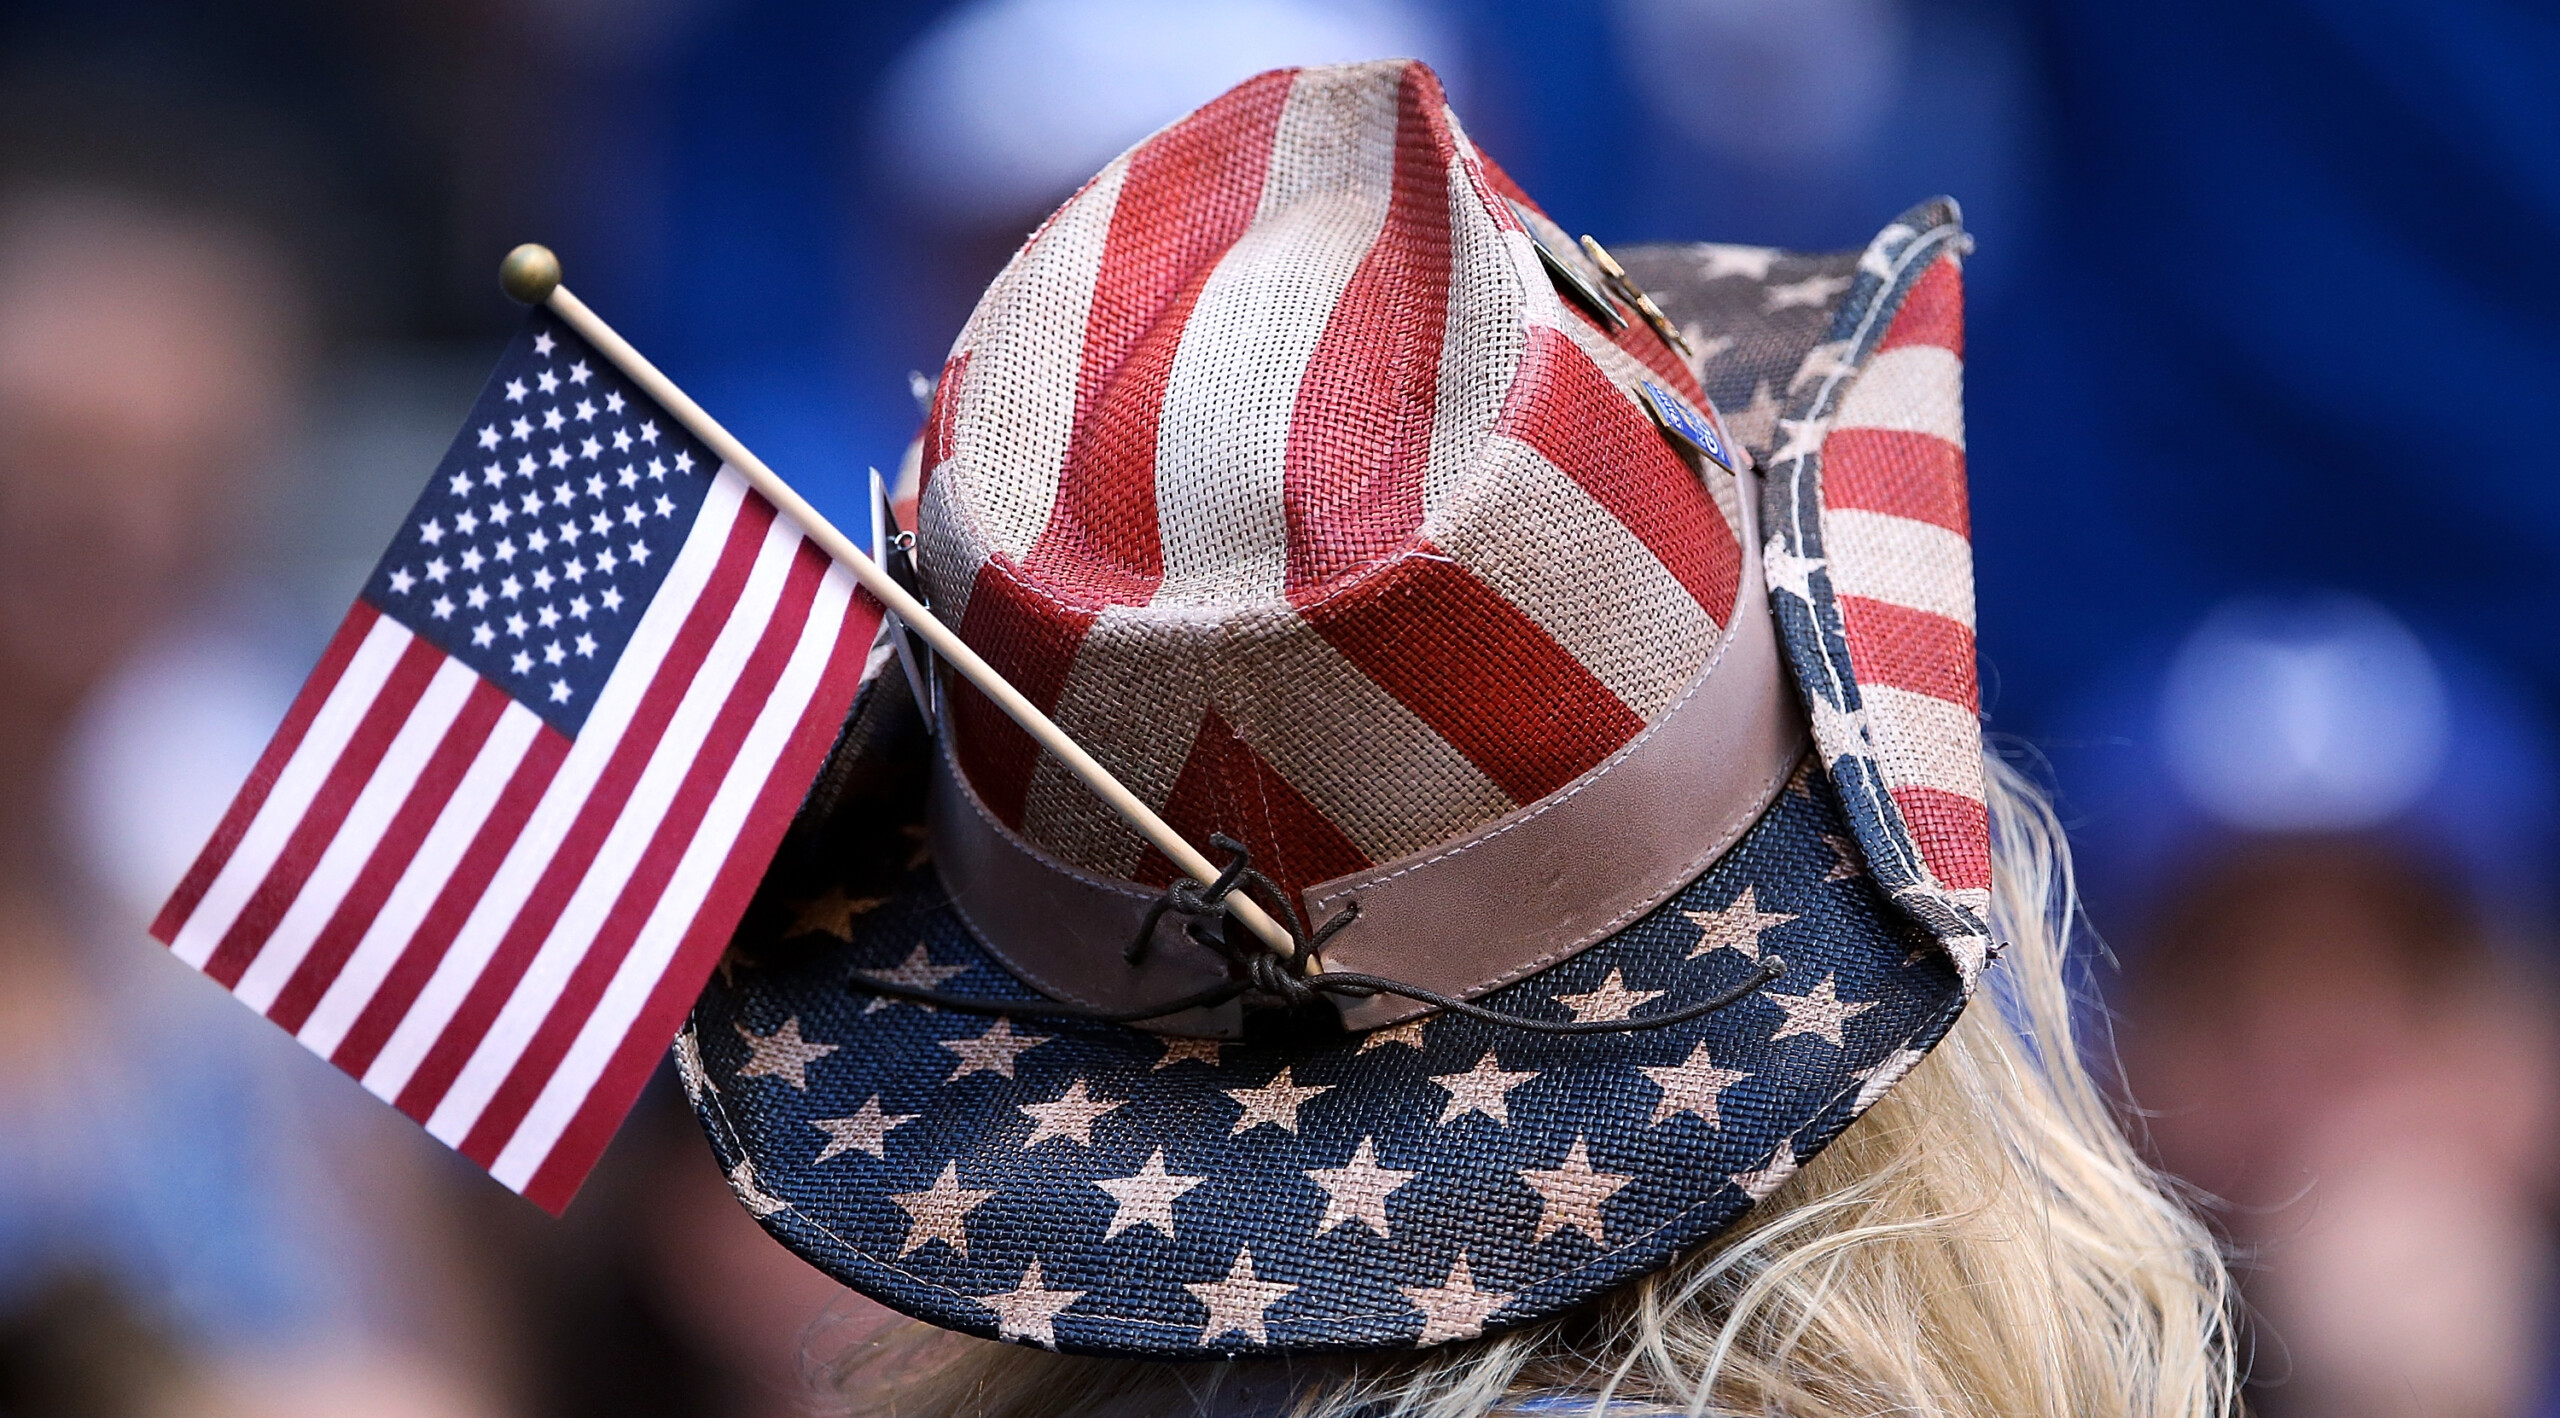 Patriots in the US: What exactly does it mean to be a patriot? Experts say  it's not easy to define